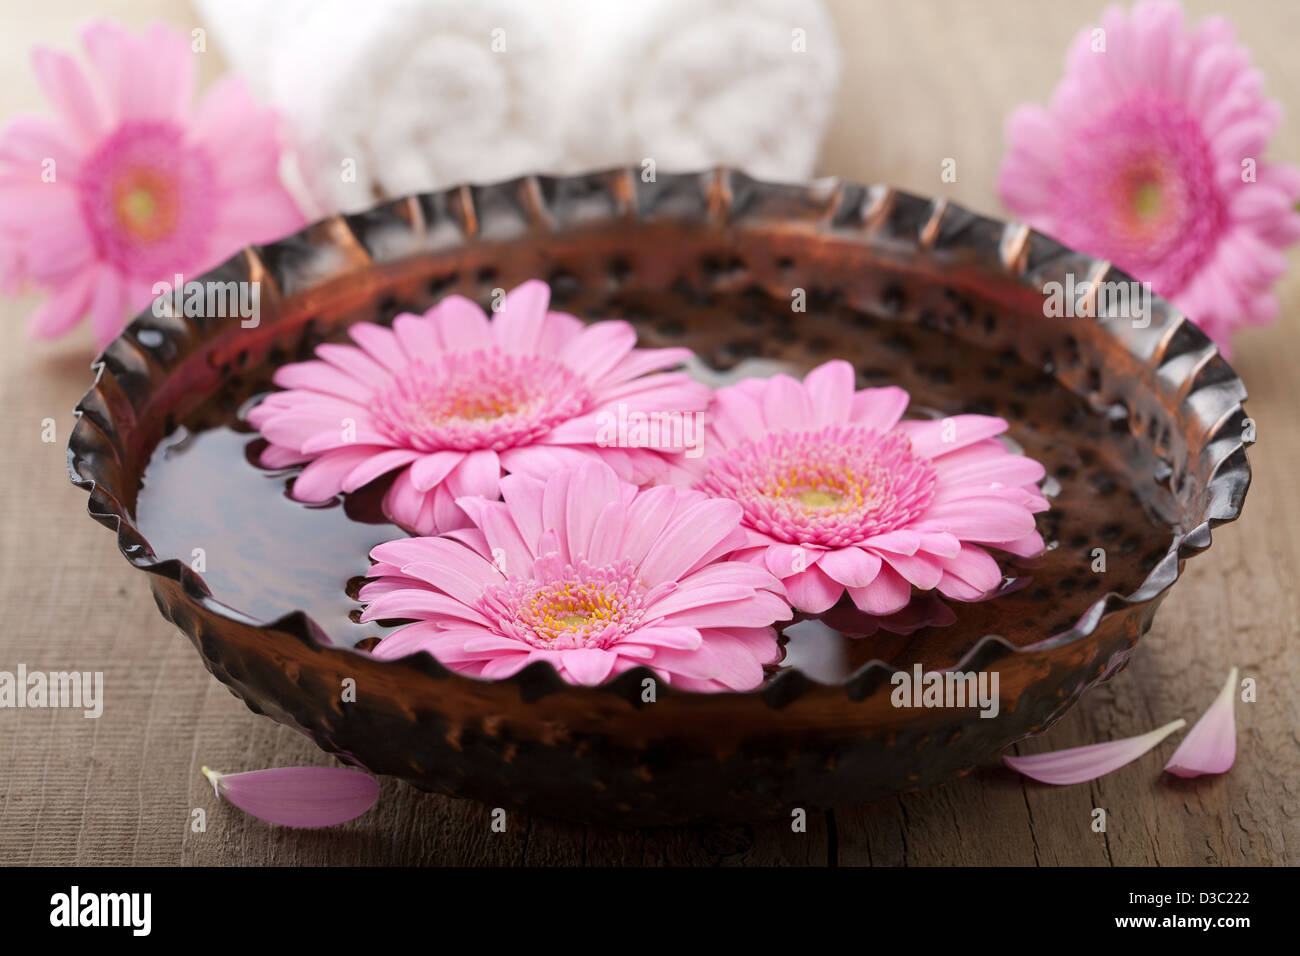 flowers in bowl for aromatherapy Stock Photo